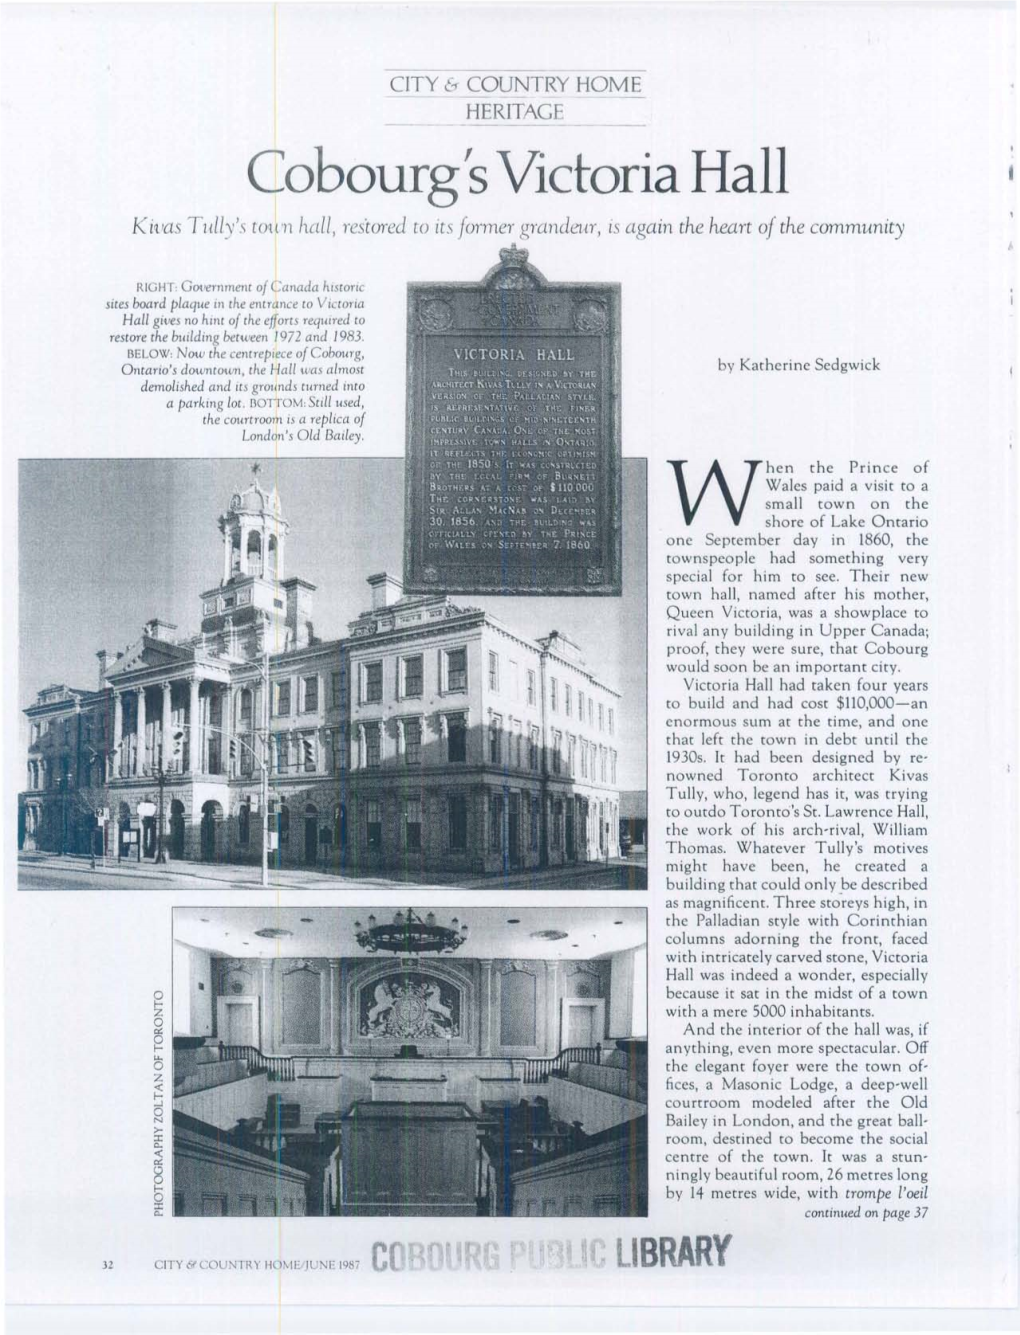 Cobourg's Victoria Hall Kivas Tully's Toh'n Hall, Restored to Its Former Grandeur, Is Again the Heart of the Community